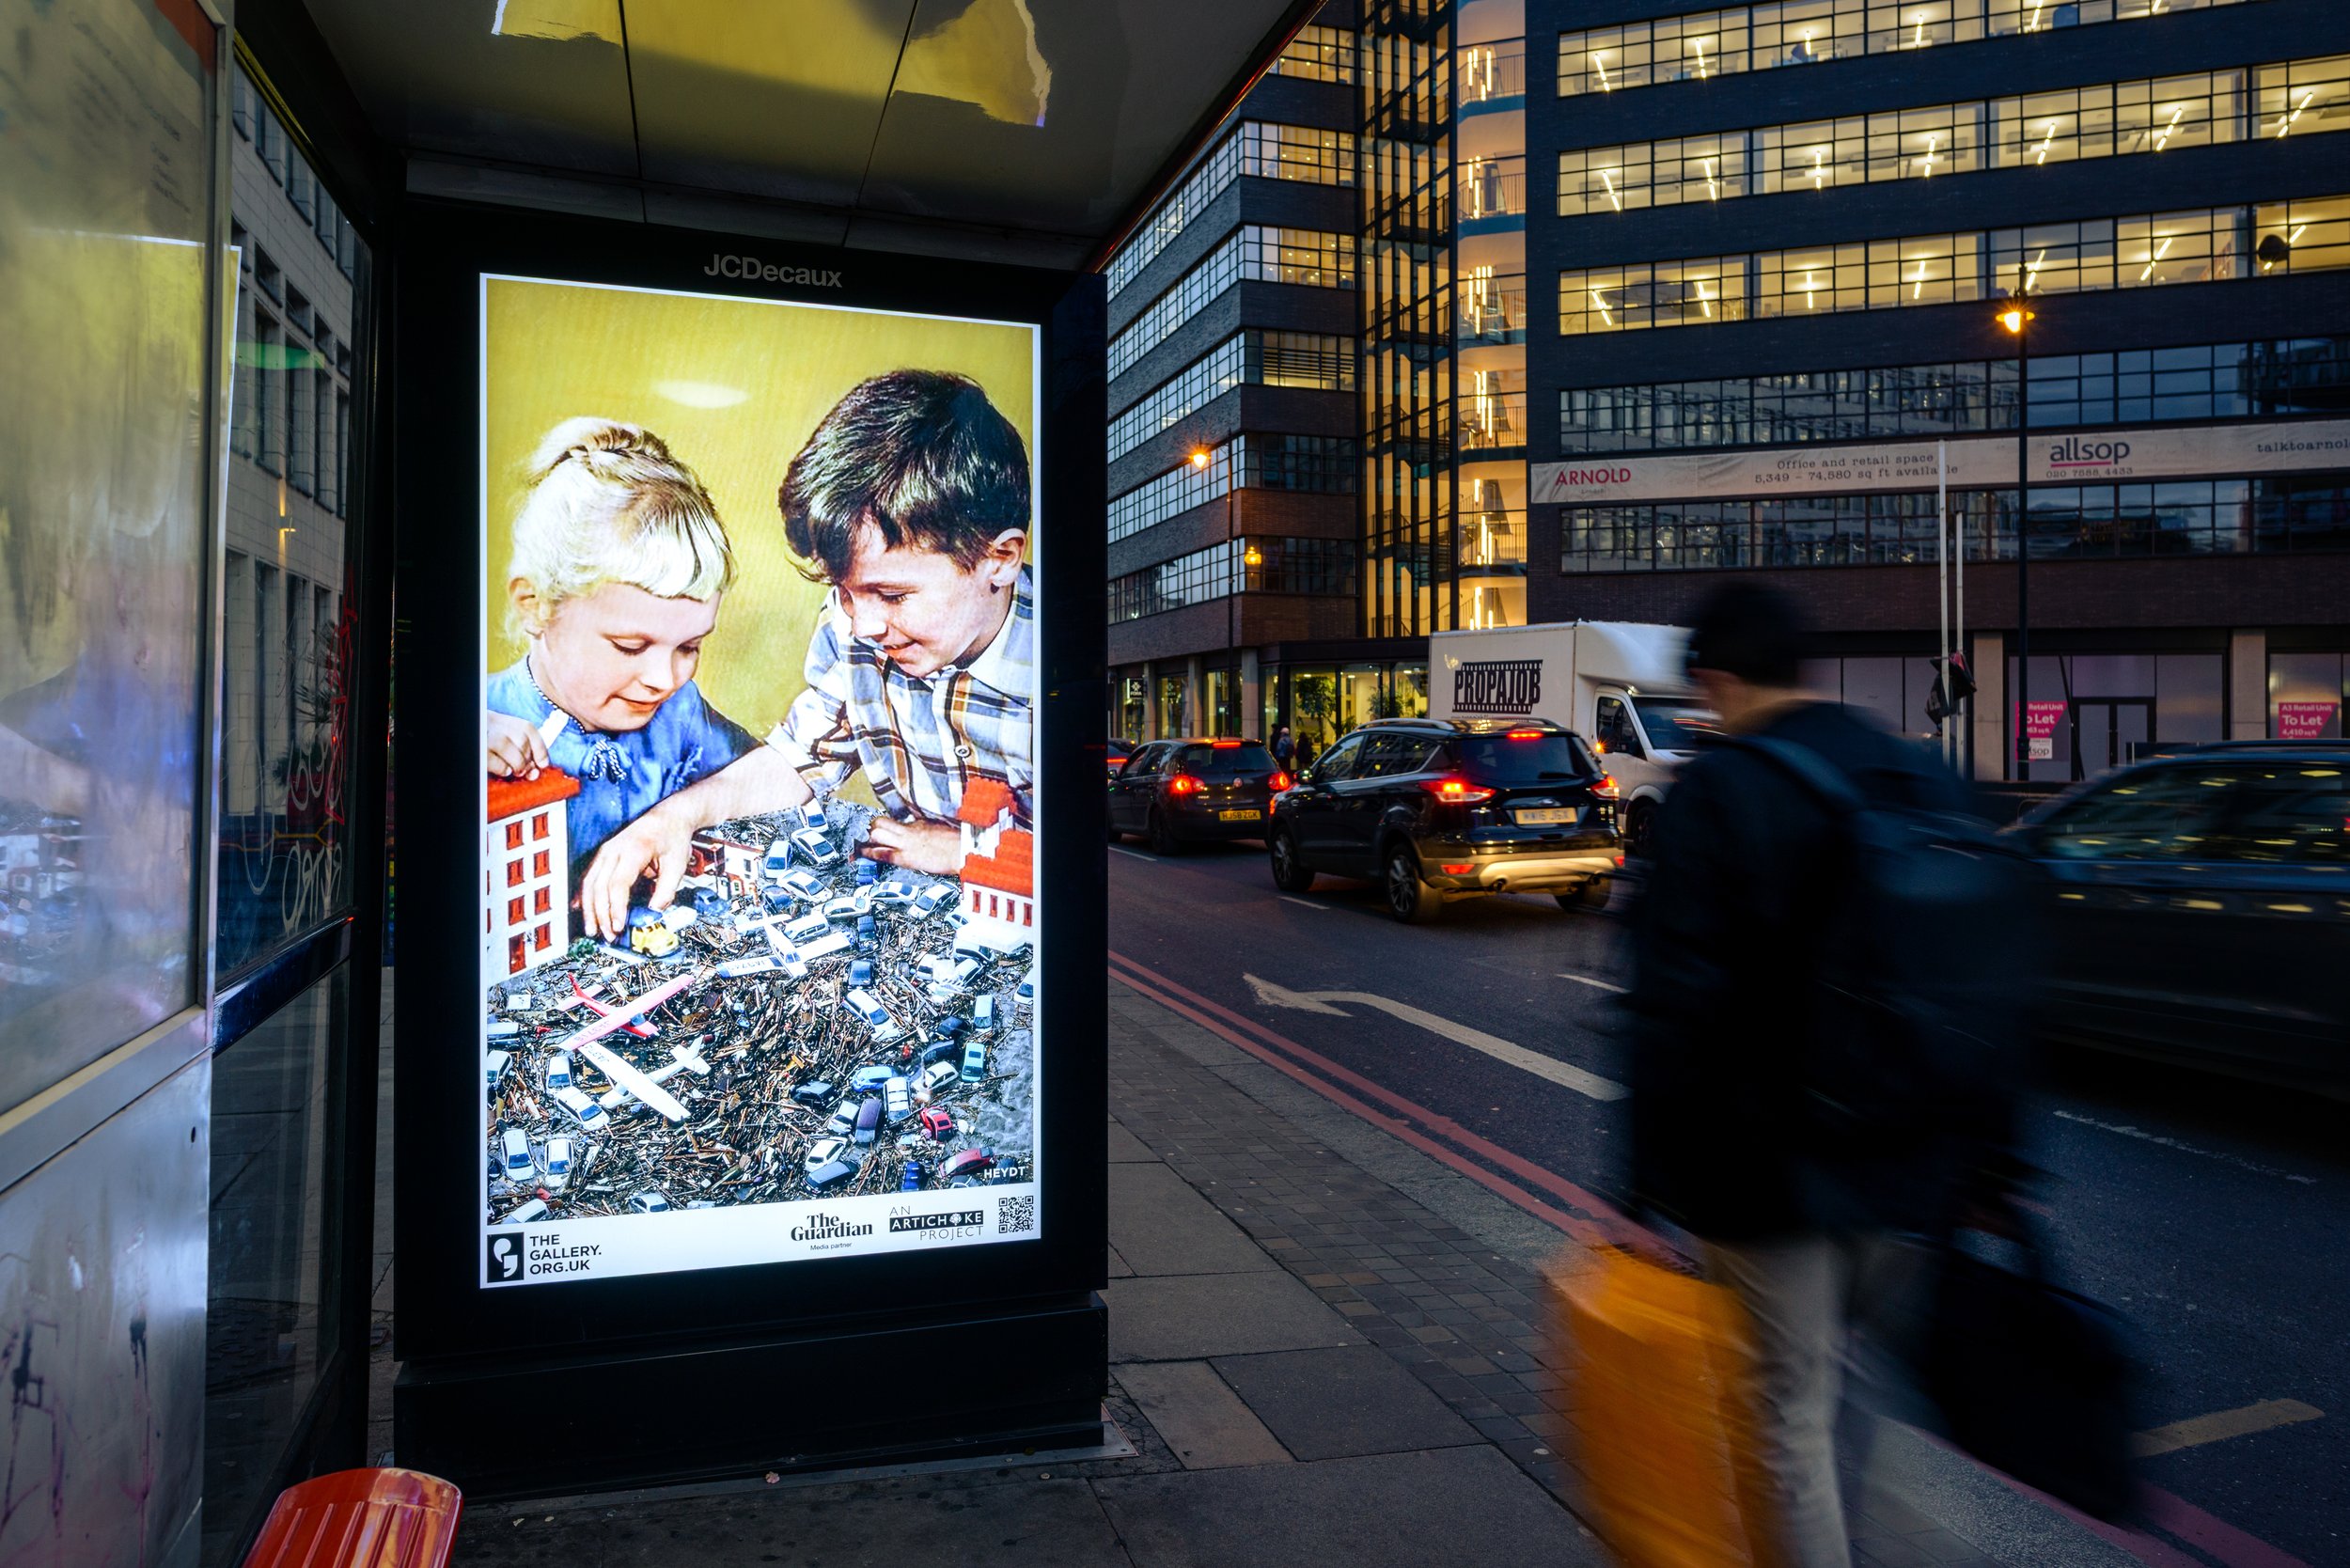 ‘Last to inherit’ (2020) by HEYDT. The Gallery, Season 2, 2023. Produced by Artichoke. Photo by Yves Salmon. Shoreditch bus shelter, London.JPG